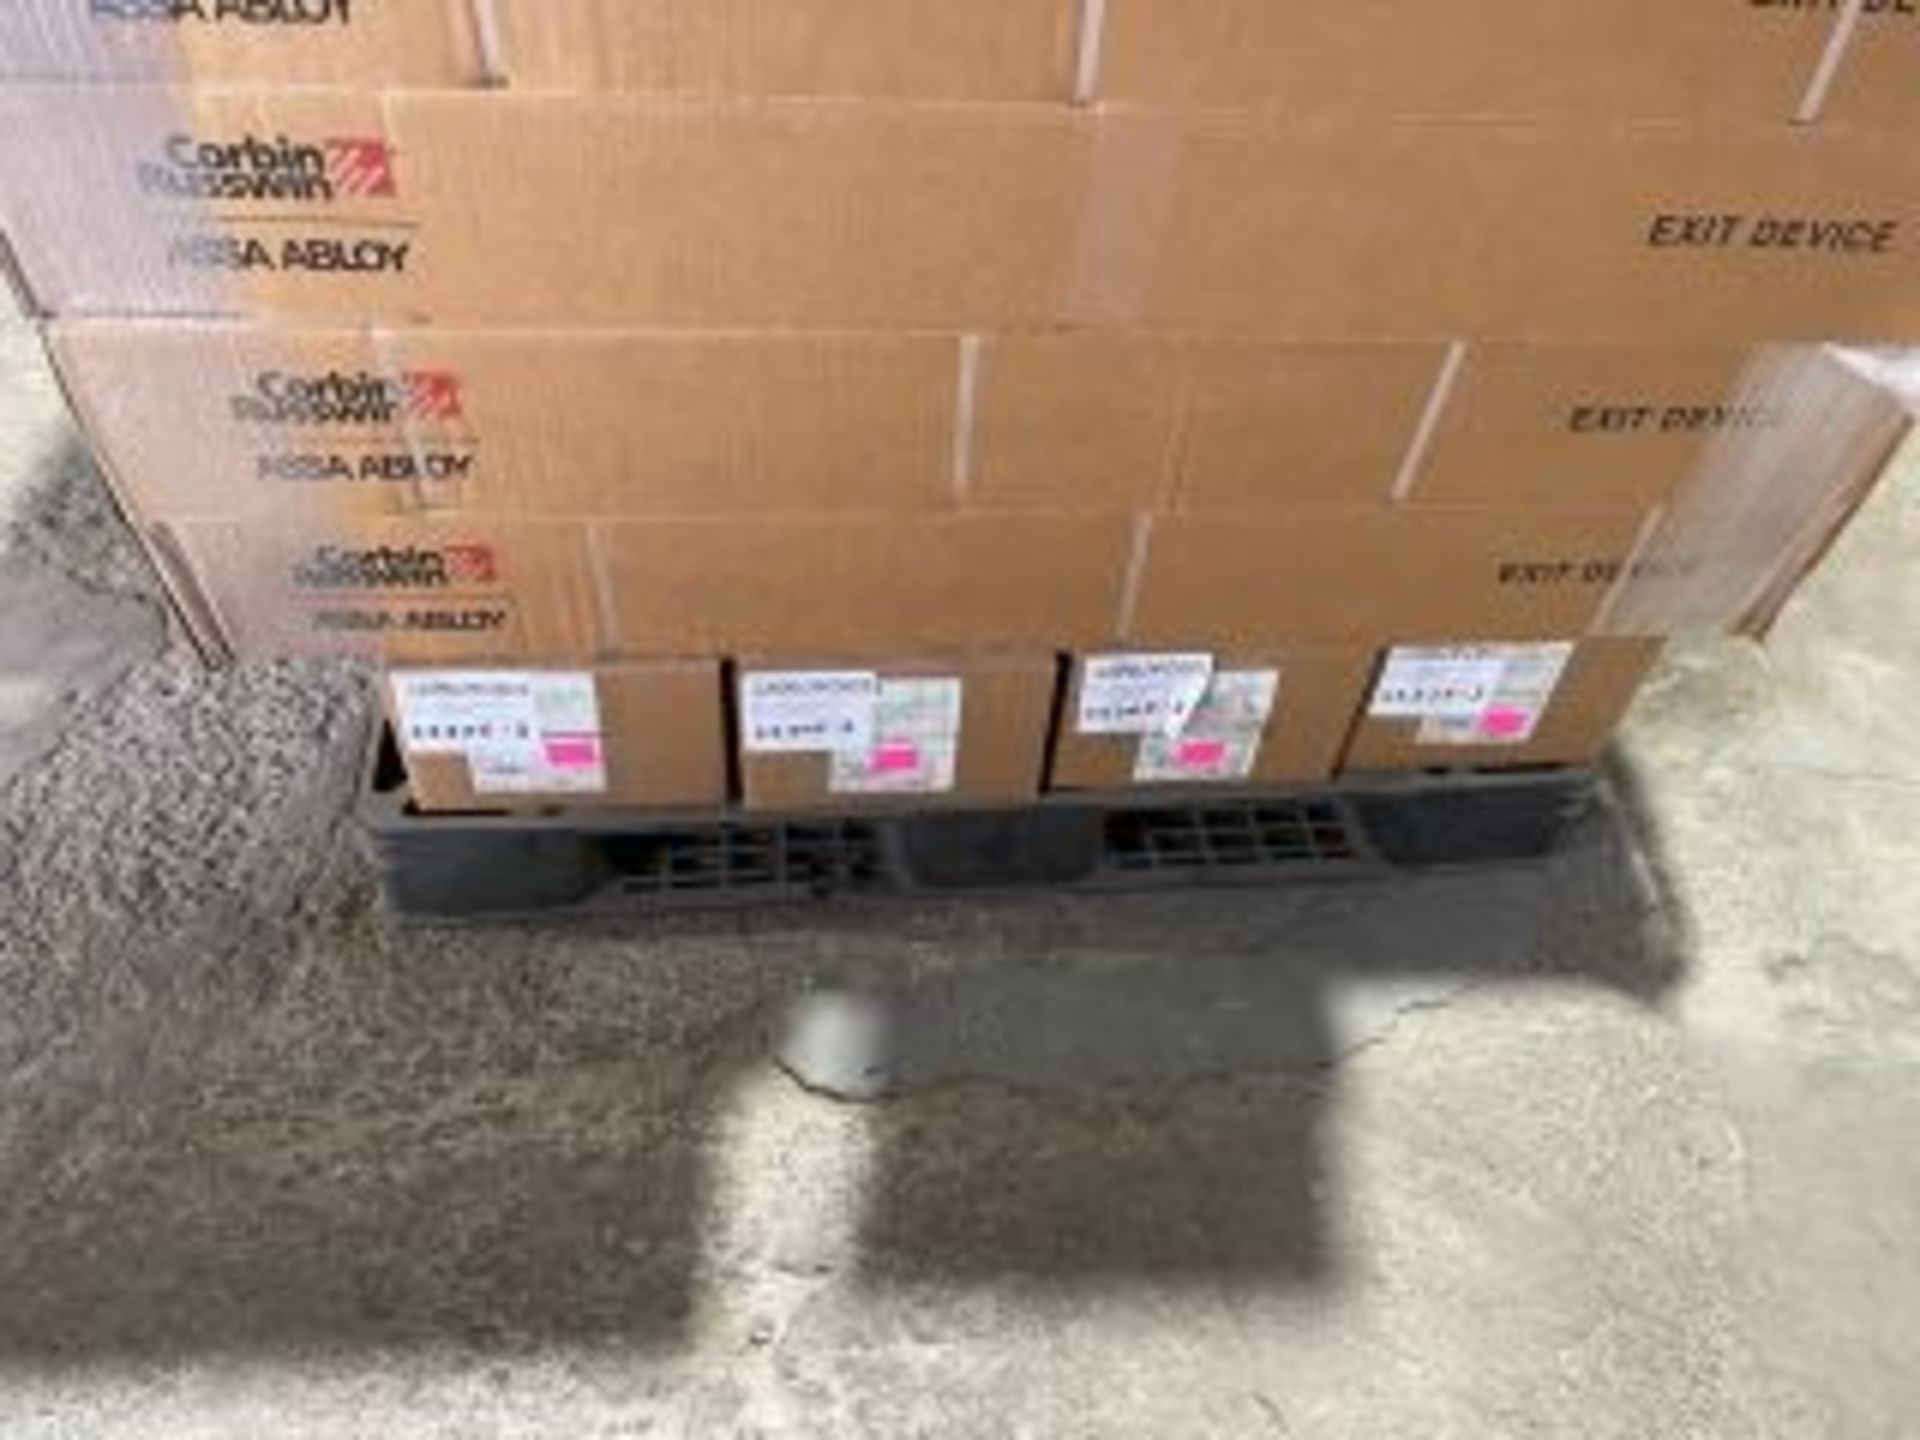 LOT including brand new door panic bars c/w hardware retail $500.00 ea (15) (ASSET LOCATED - Image 4 of 5